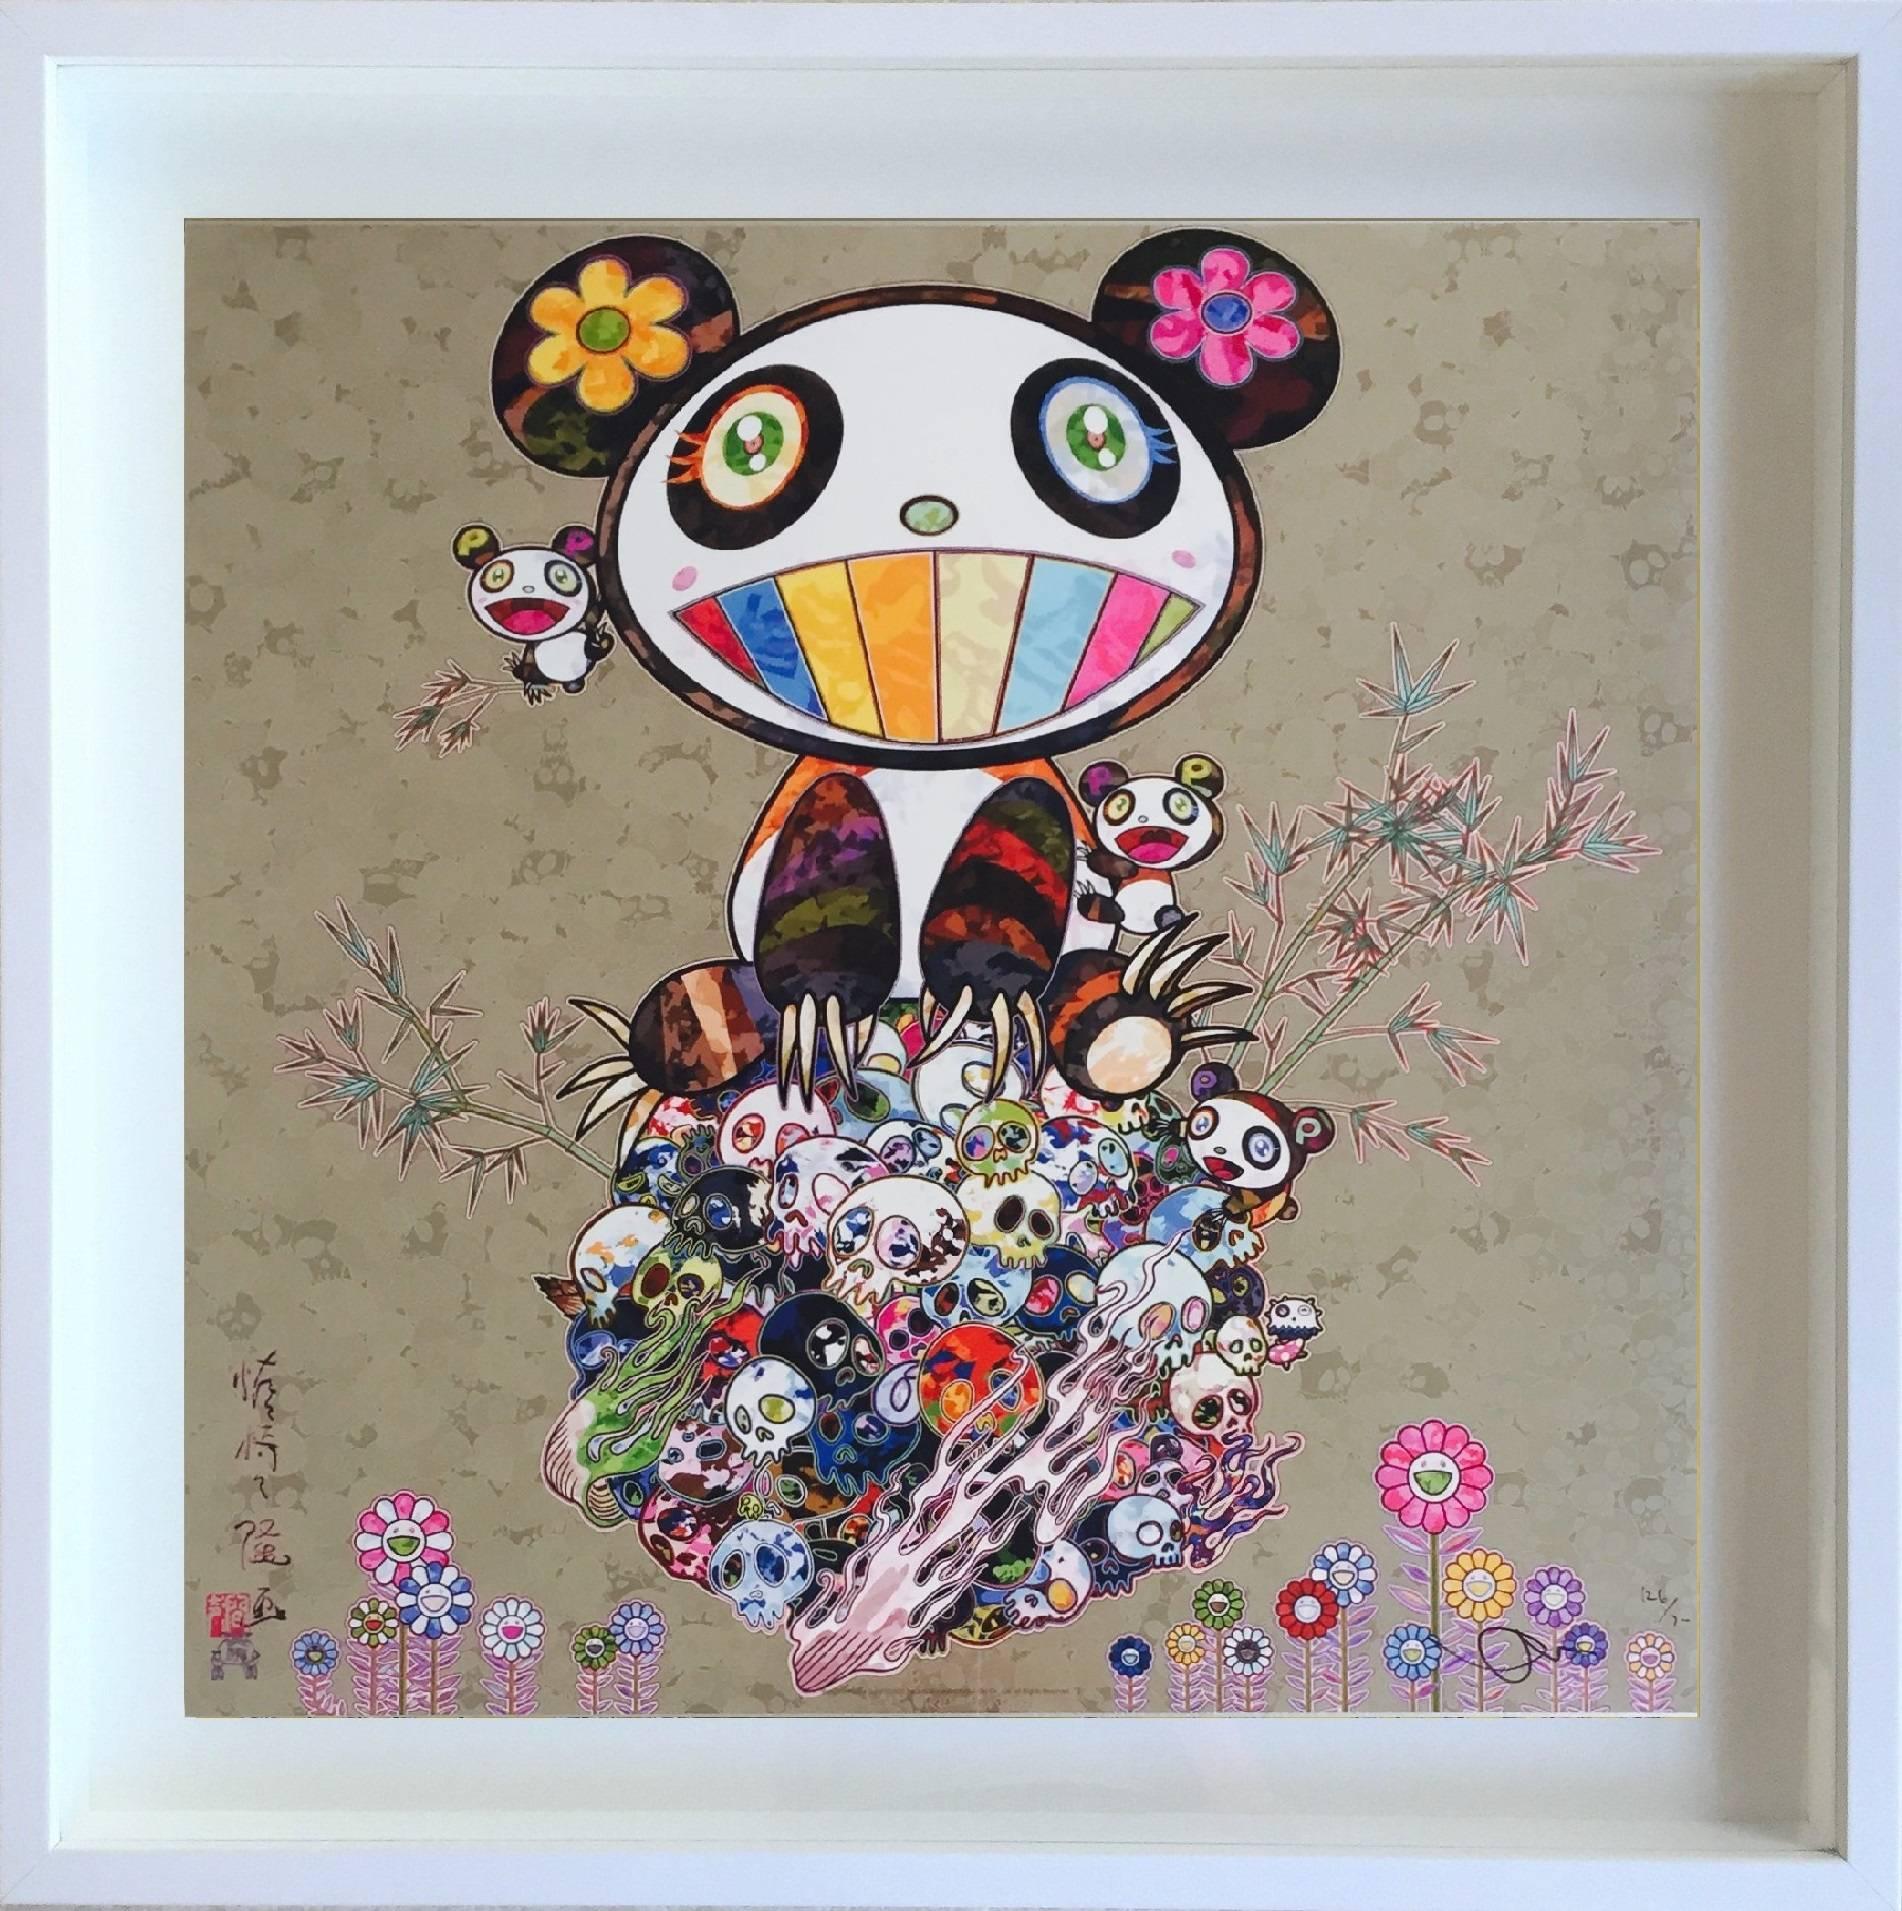 This is an original Murakami Takashi print in its original box UNOPENED, and therefore in perfect original condition, guaranteed for authenticity and condition of print. This is signed by Murakami and numbered out of 300 editions. Purchase of this